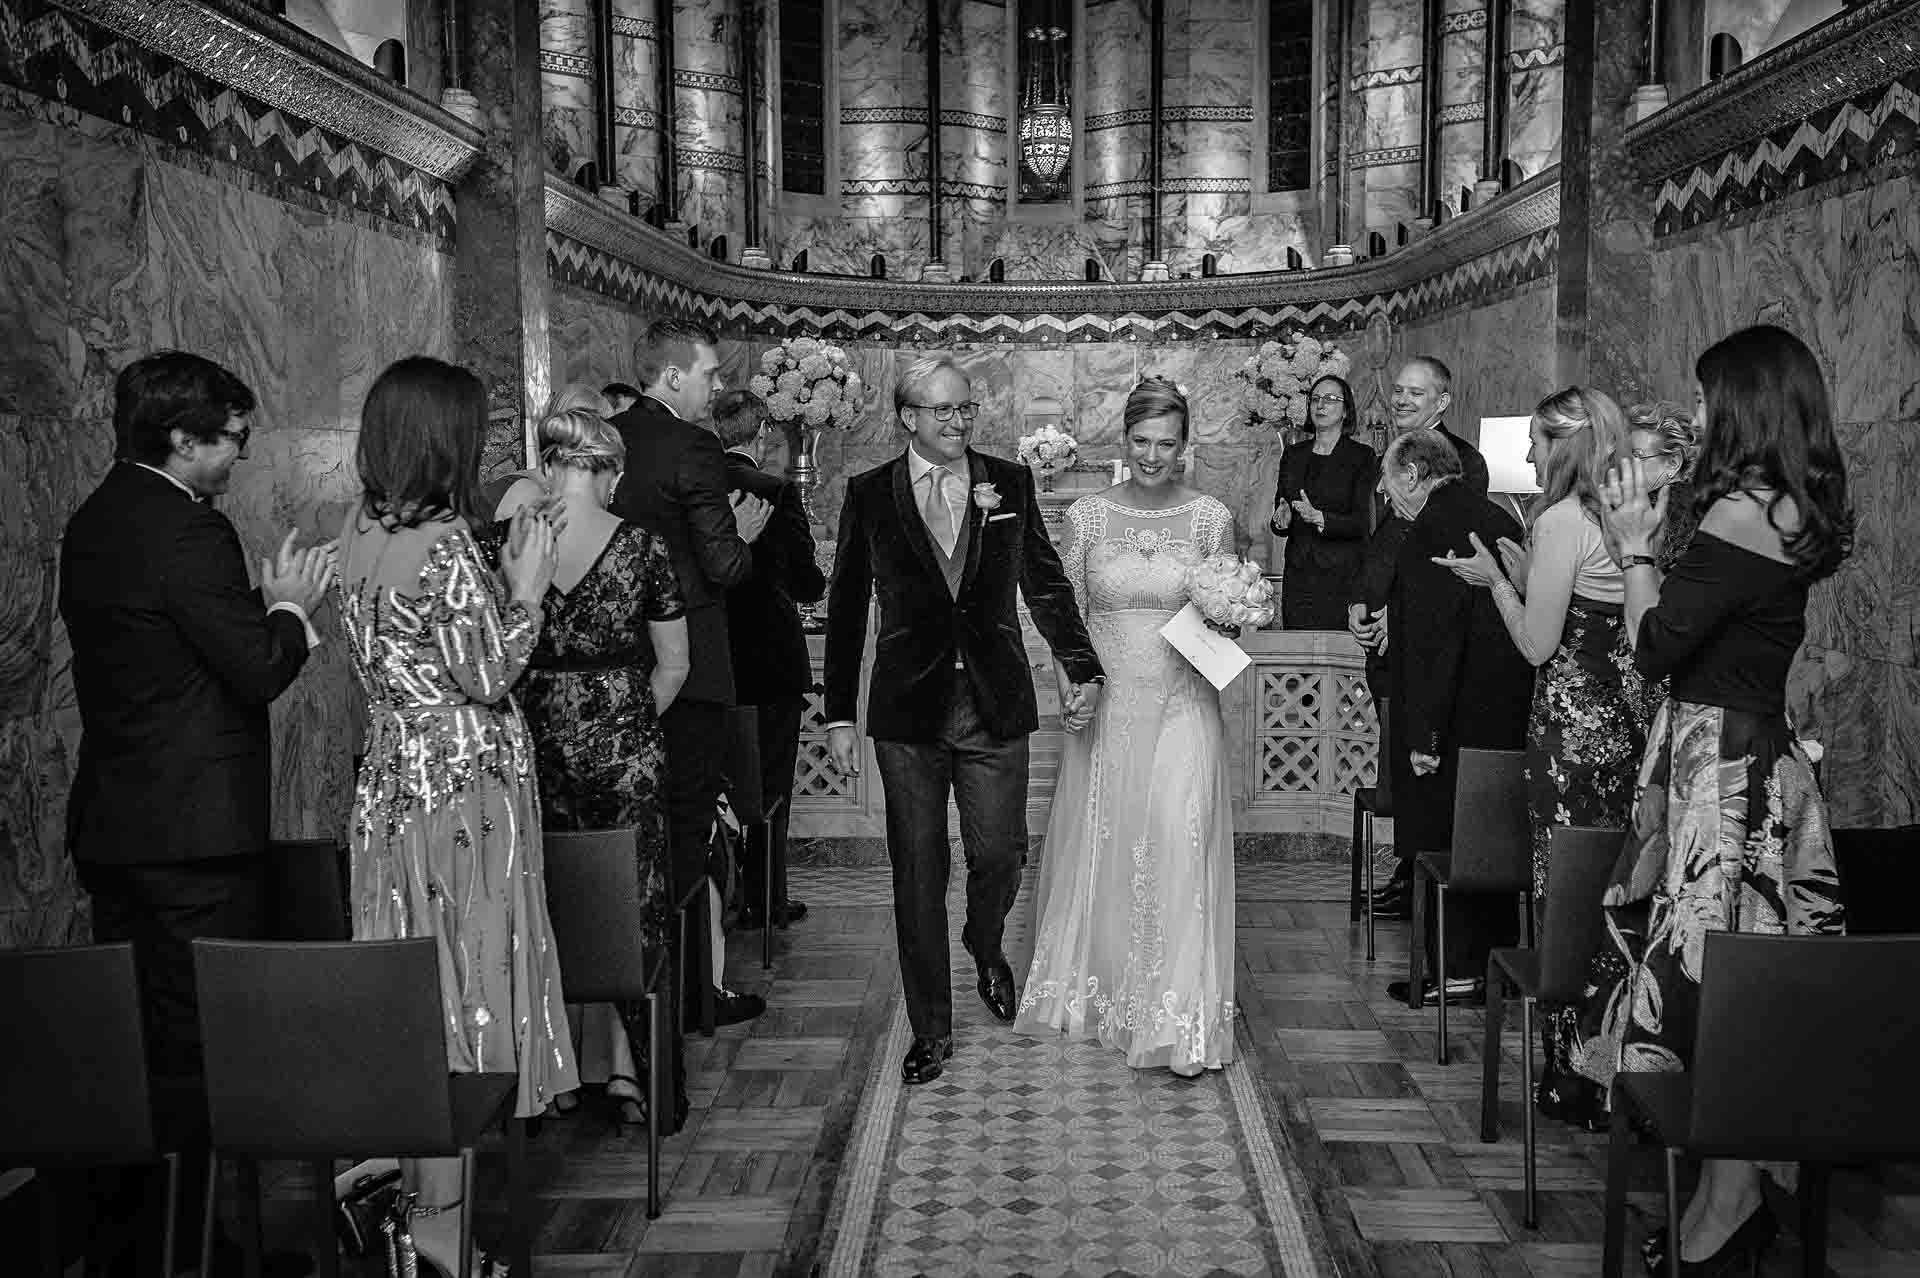 Wedding at Fitzrovia Chapel - Couple Walking Down Aisle Together